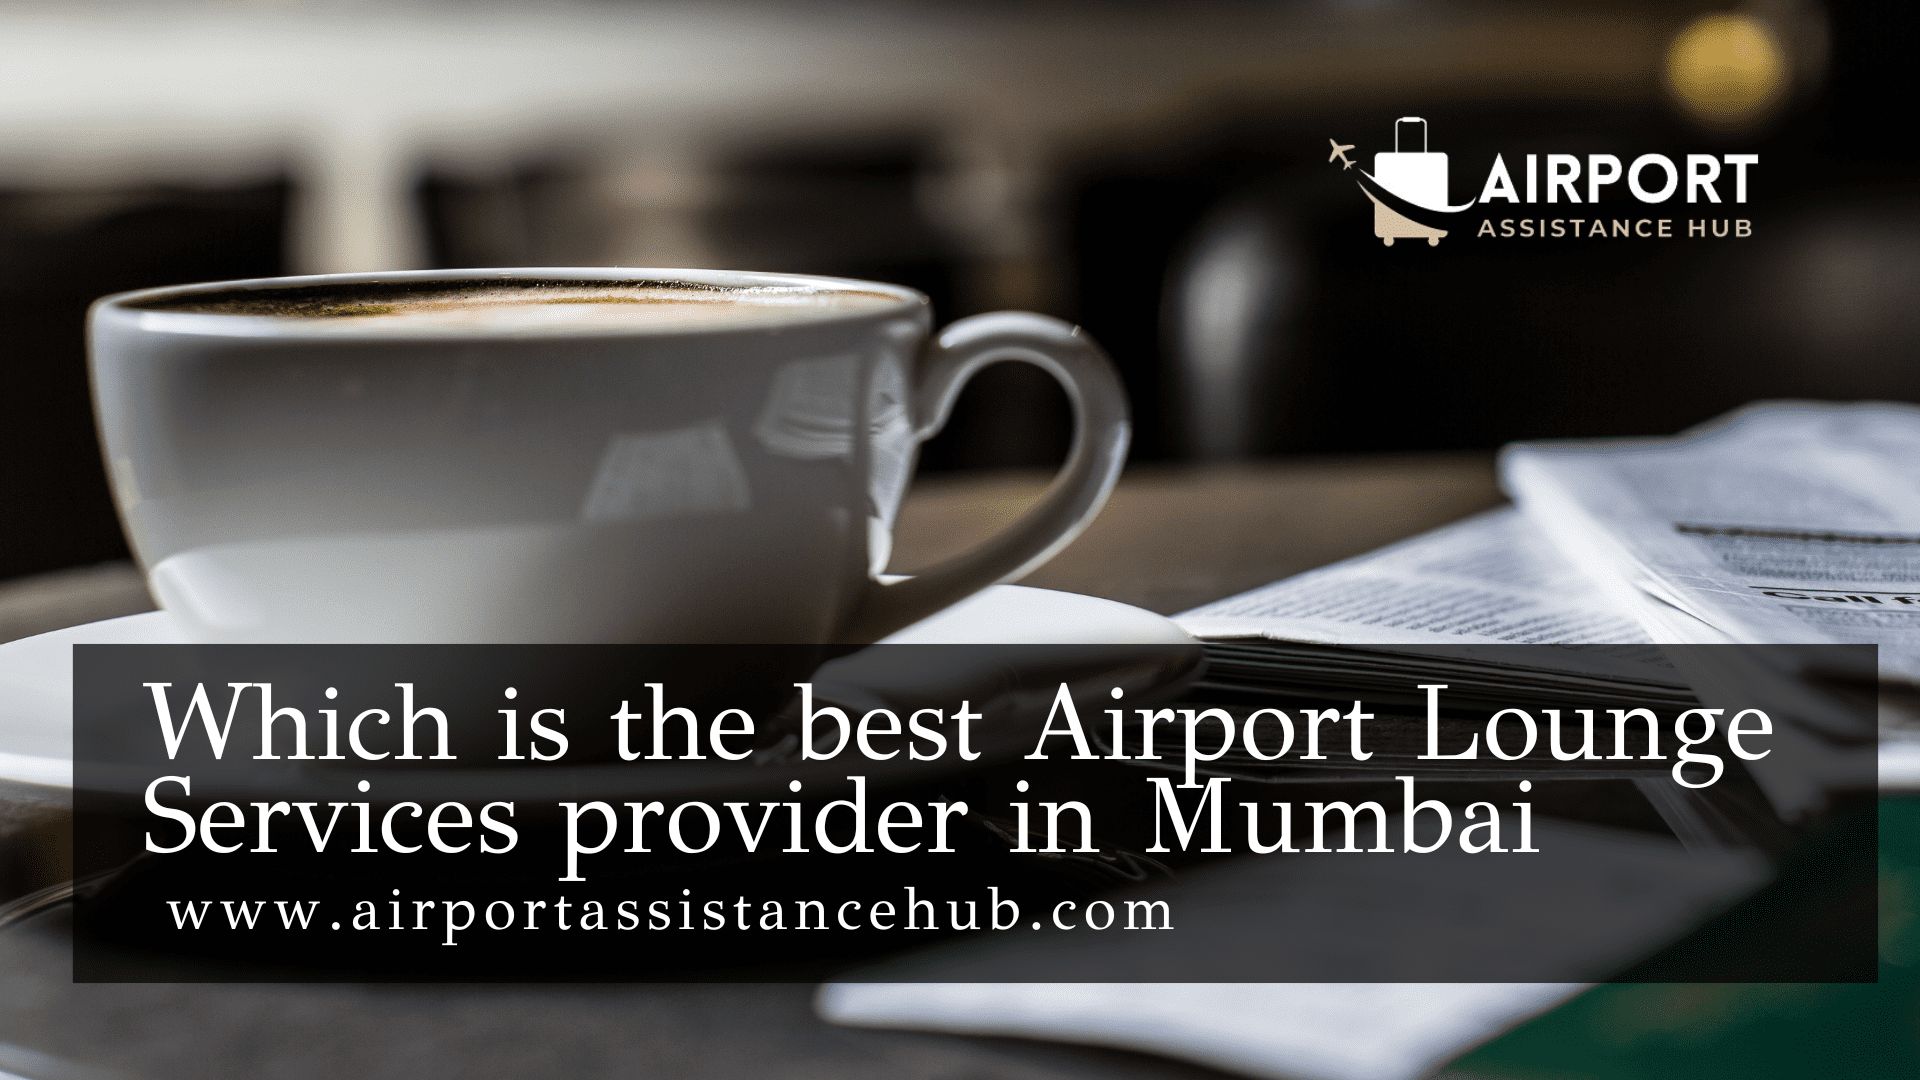 Which is the best Airport Lounge Services provider in Mumbai